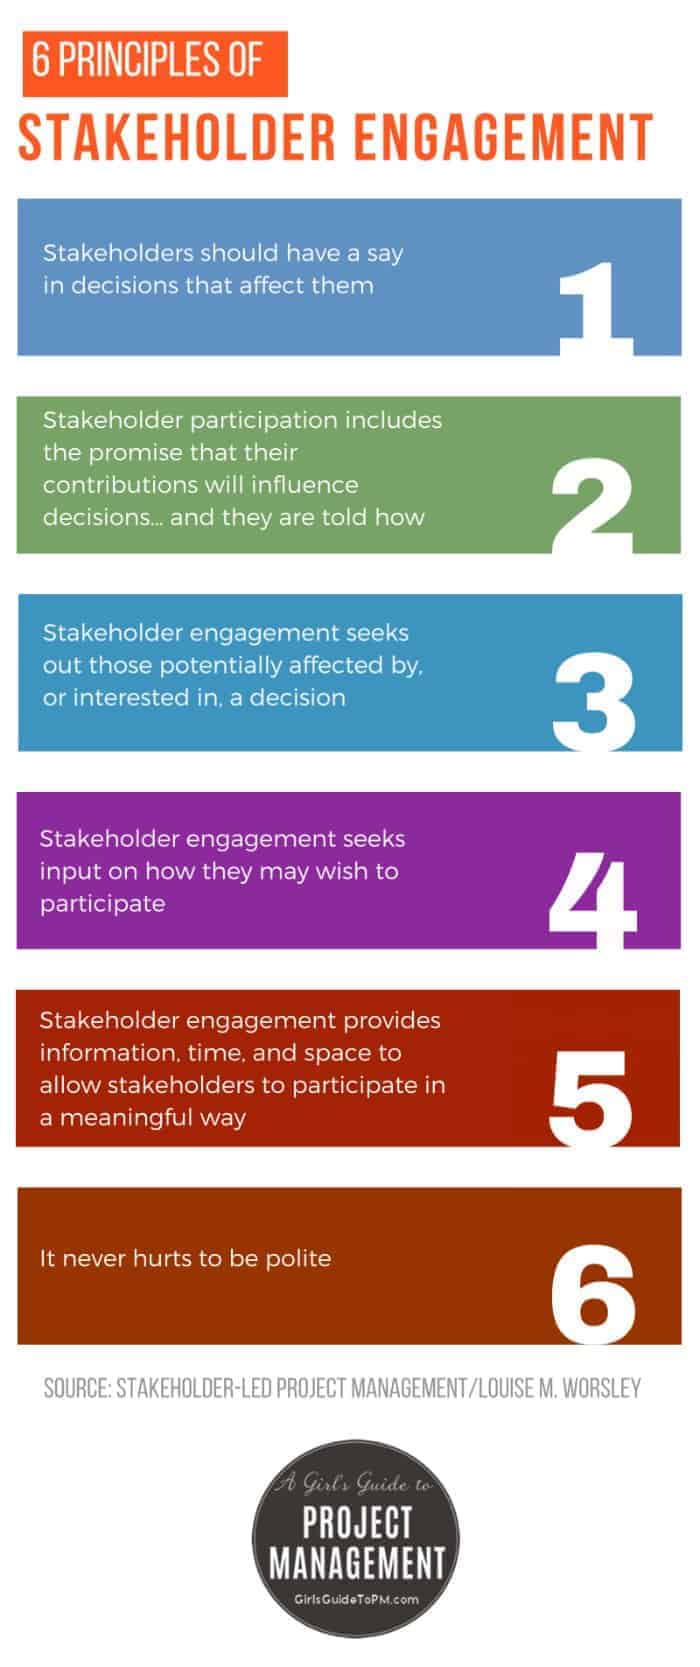 6 Principles of Stakeholder Management